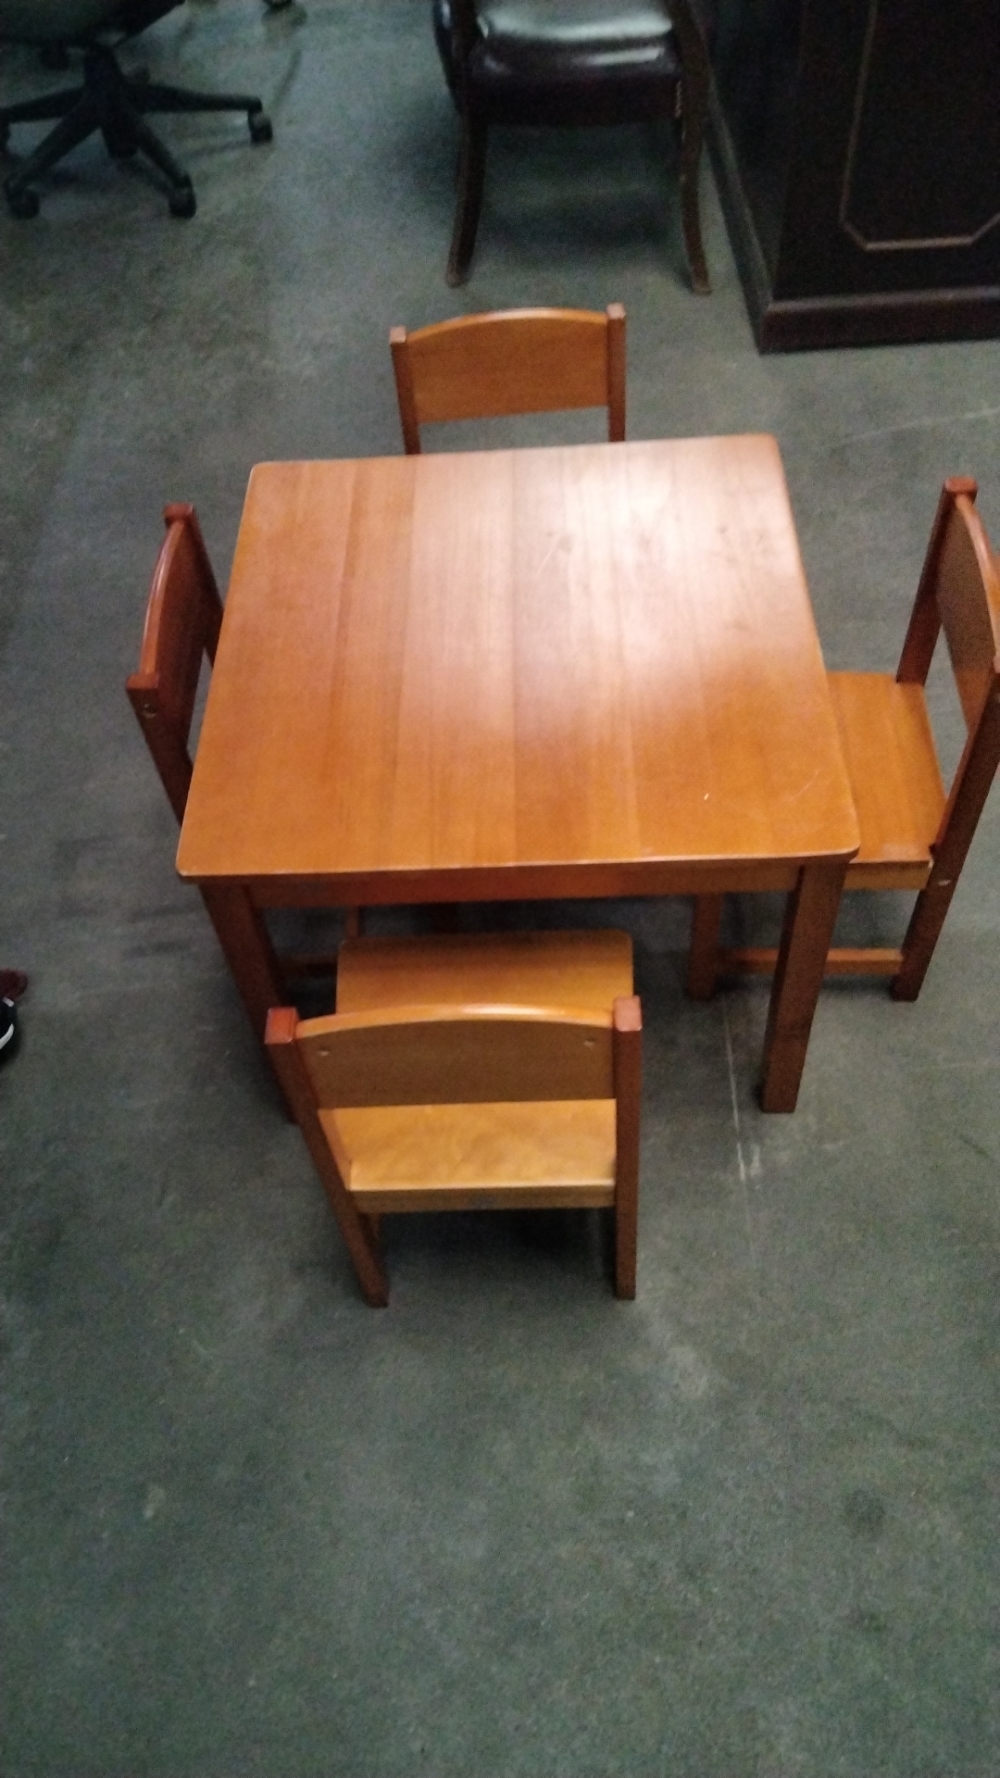  Kids Table & Chairs